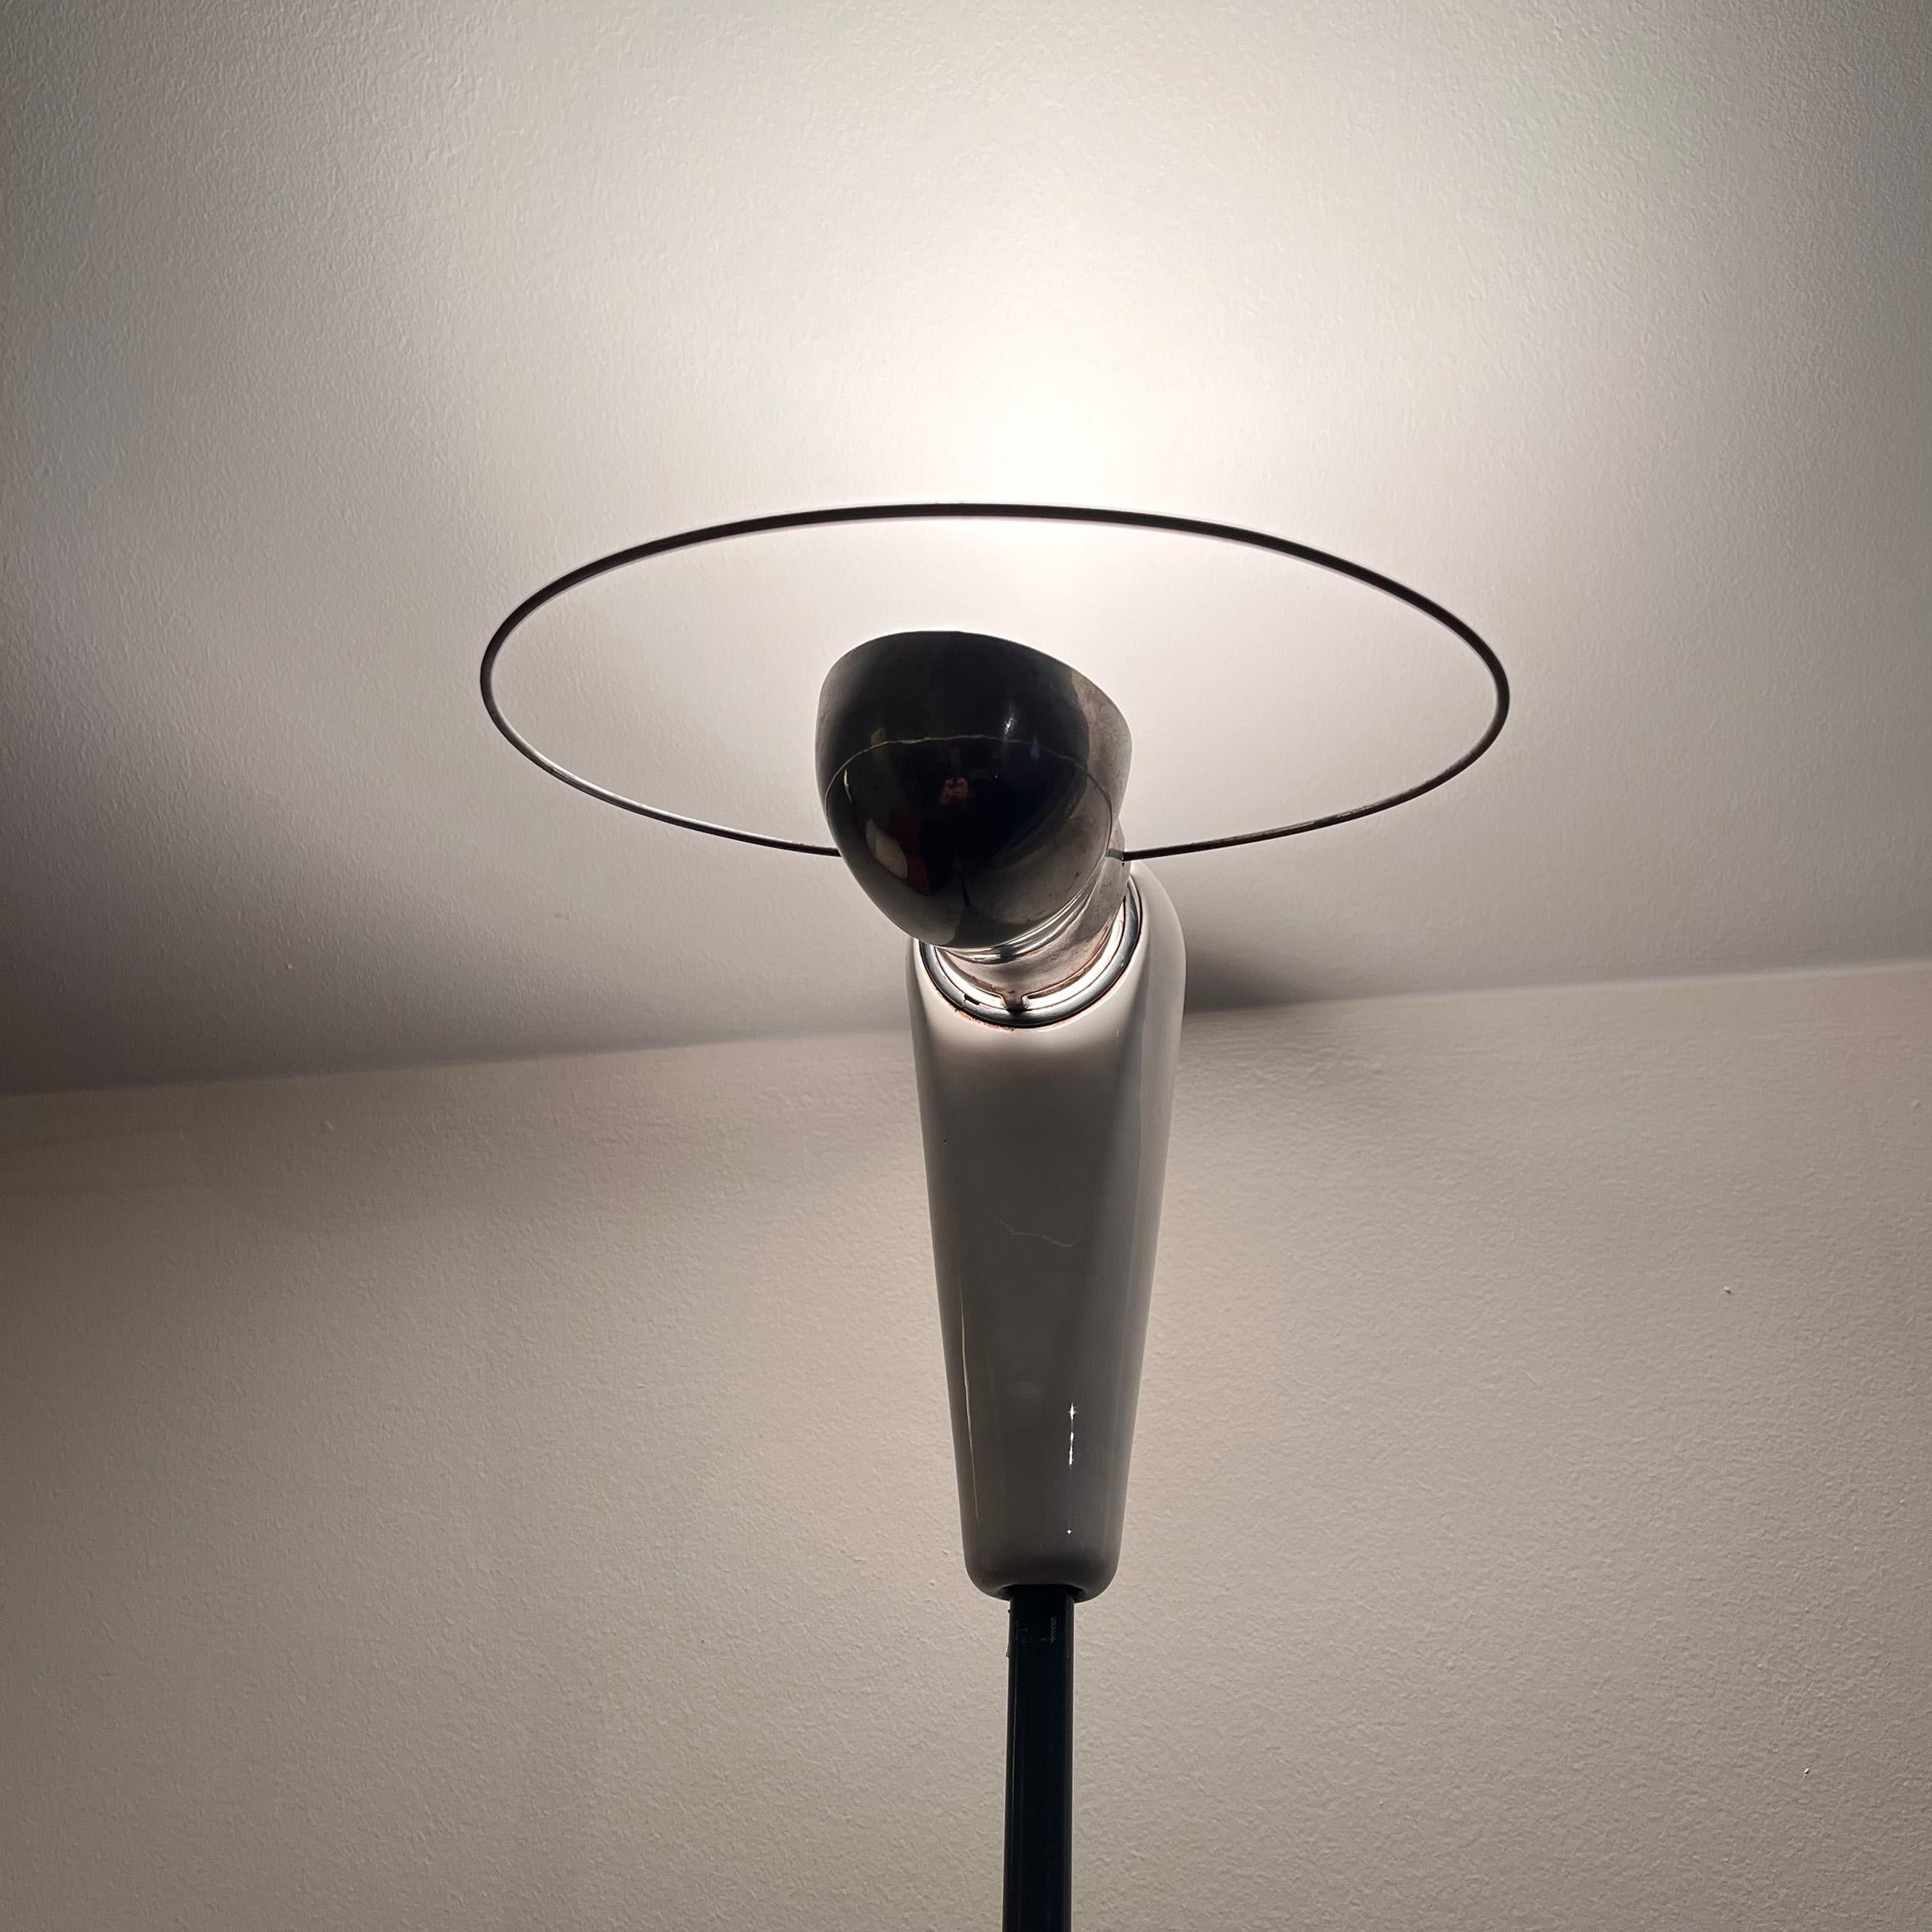 Achille castiglioni (1918-2002).

Bibip

A ceramic and metal floor lamp.
The swivel aluminum reflector with a circular handle connected with a white ceramic head on a steel slender stem on a hemispherical white ceramic base.
Produced by Flos,